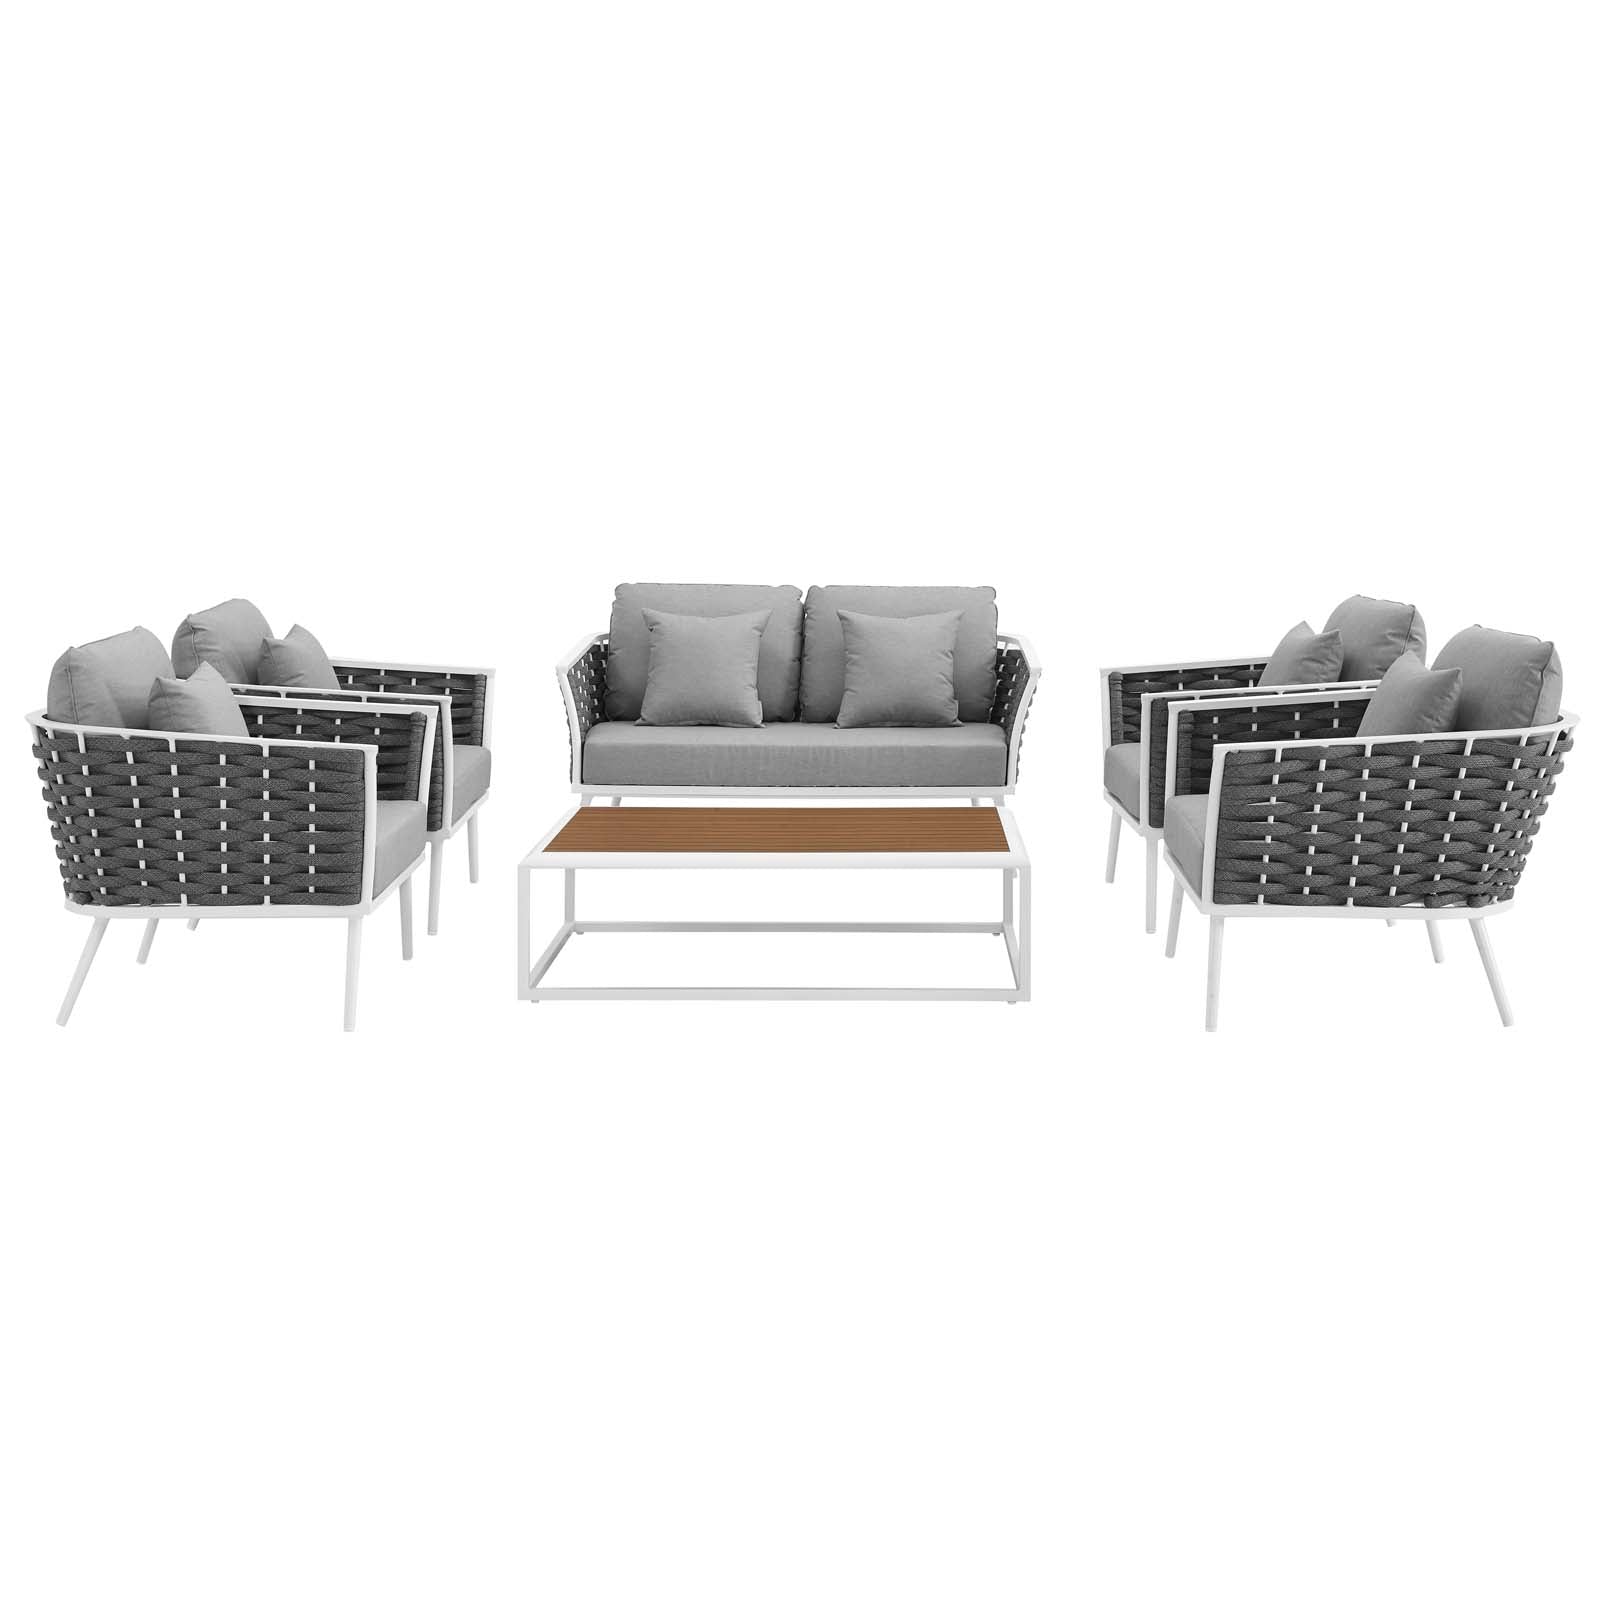 Stance 6 Piece Outdoor 119"W & 31.5 H Patio Aluminum Sectional Sofa Set White